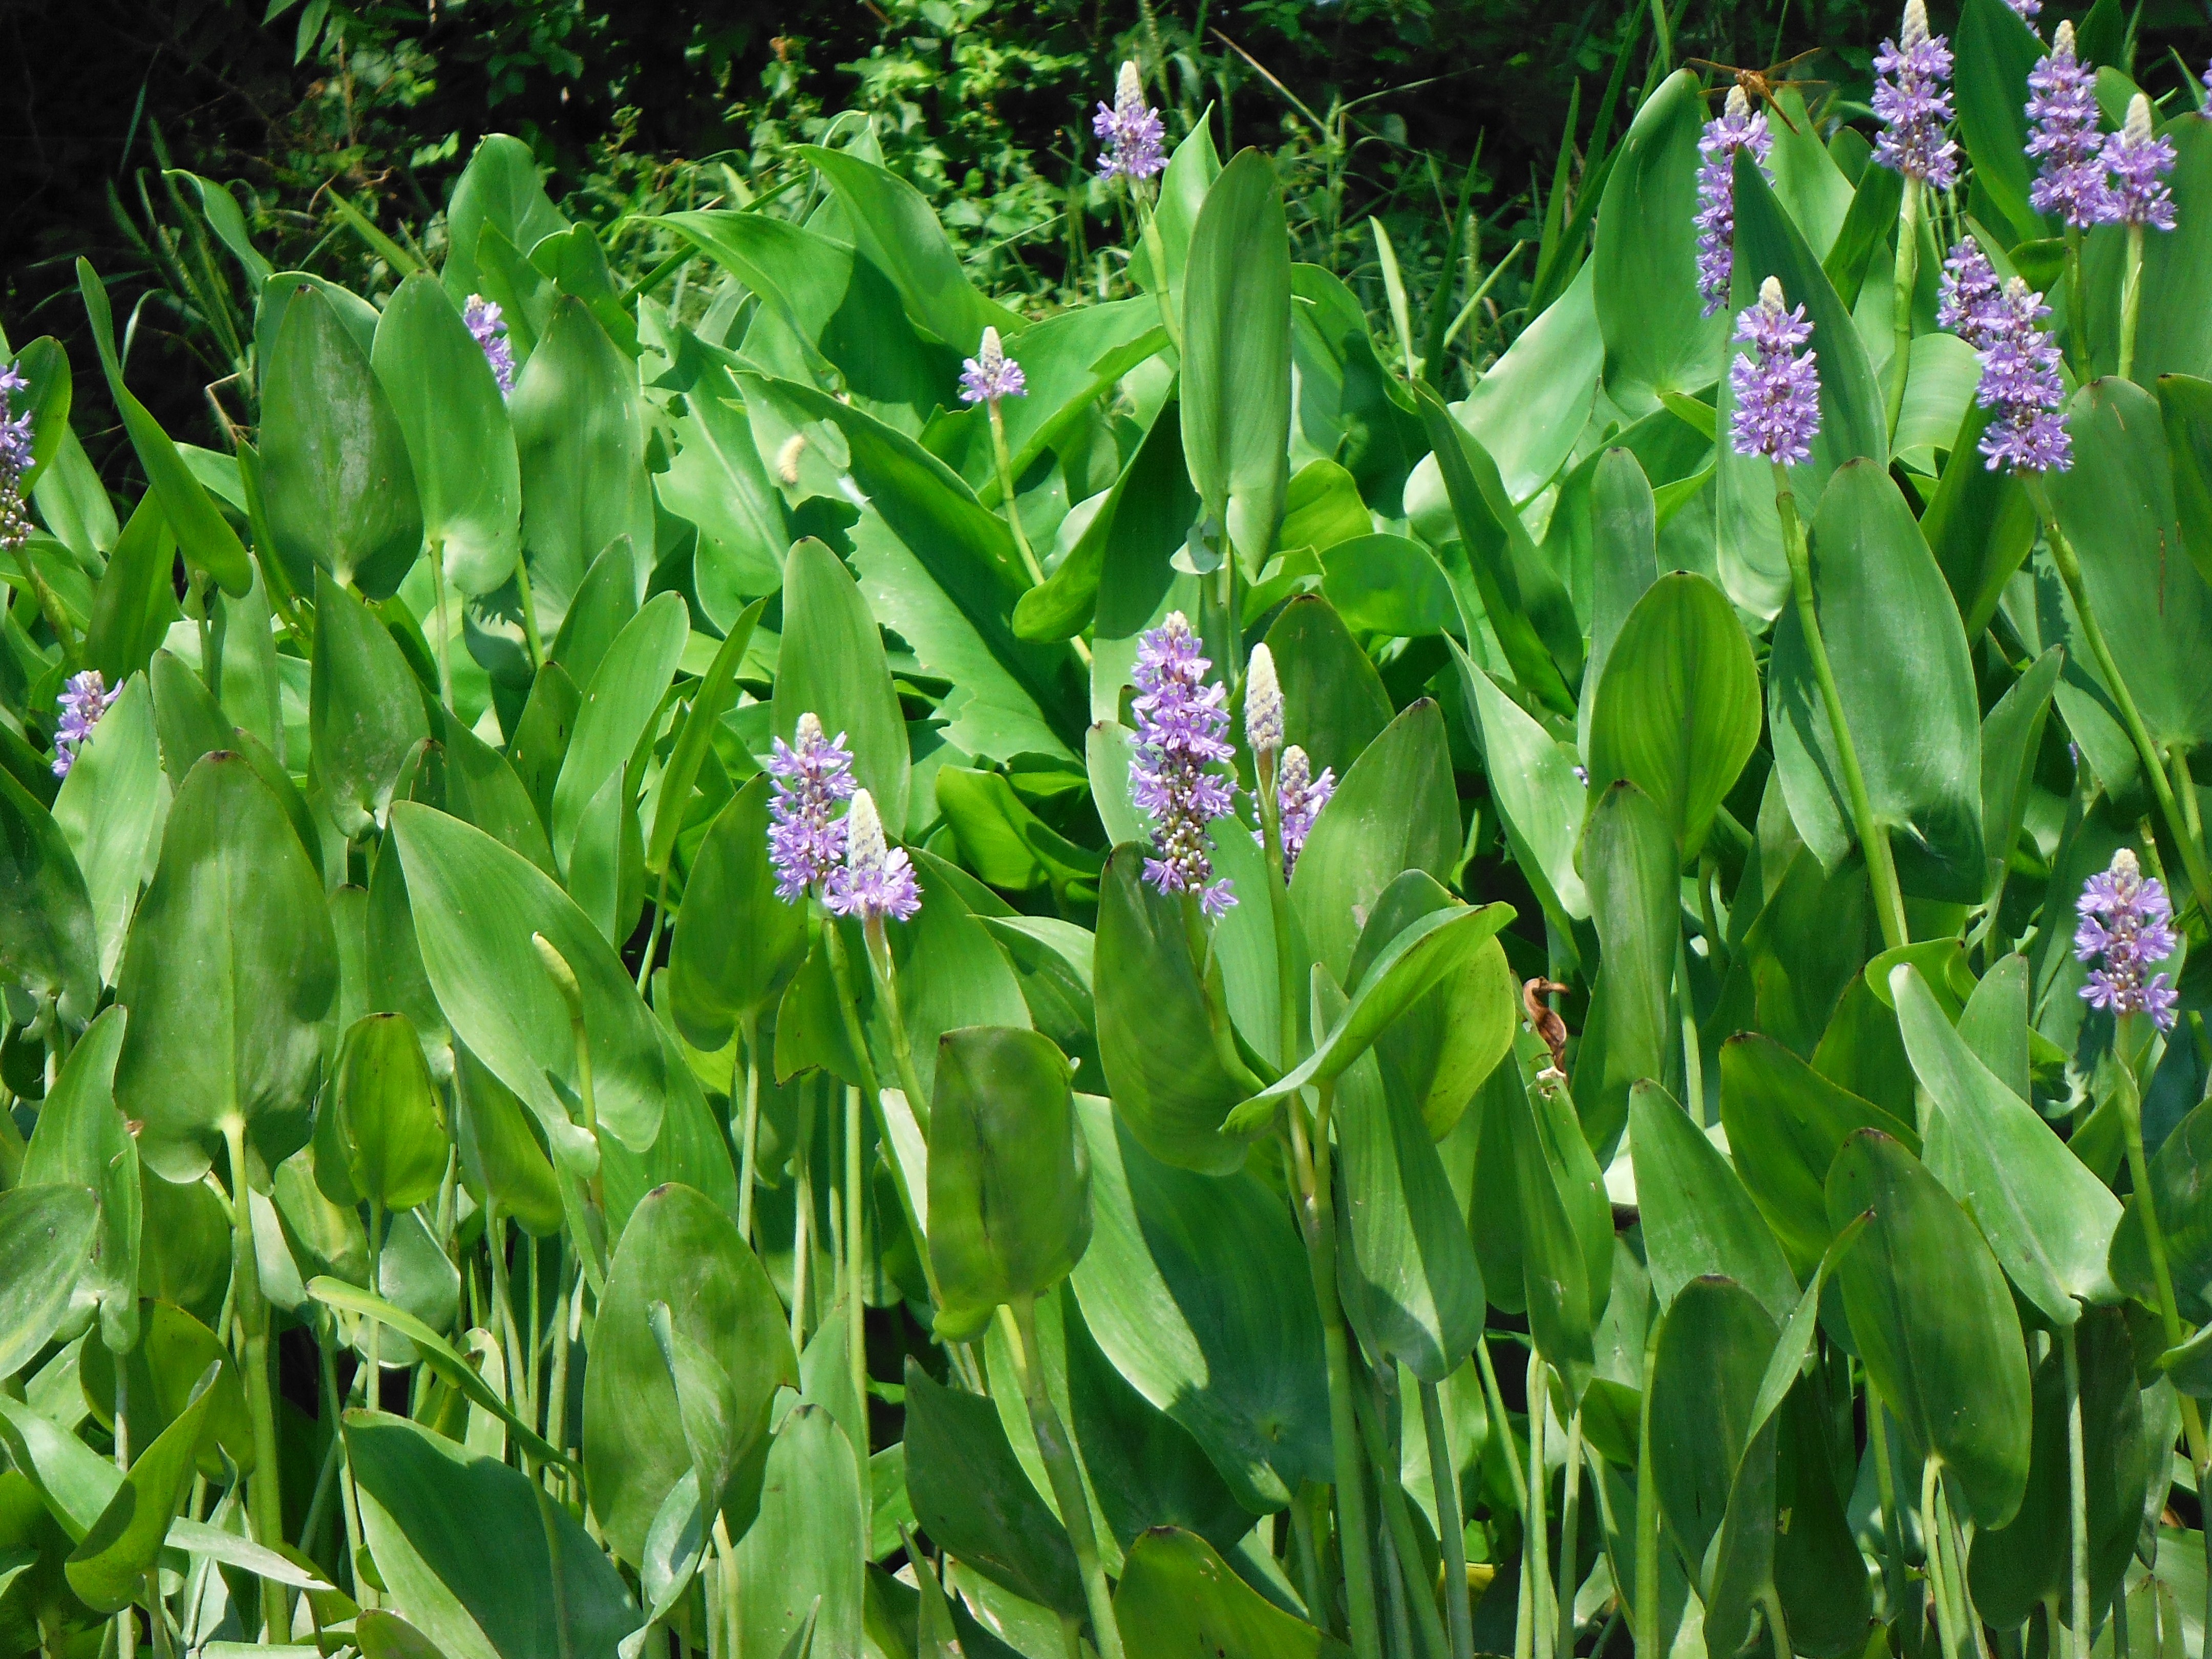 Pickerel Weed also grows in along the Chicone. 